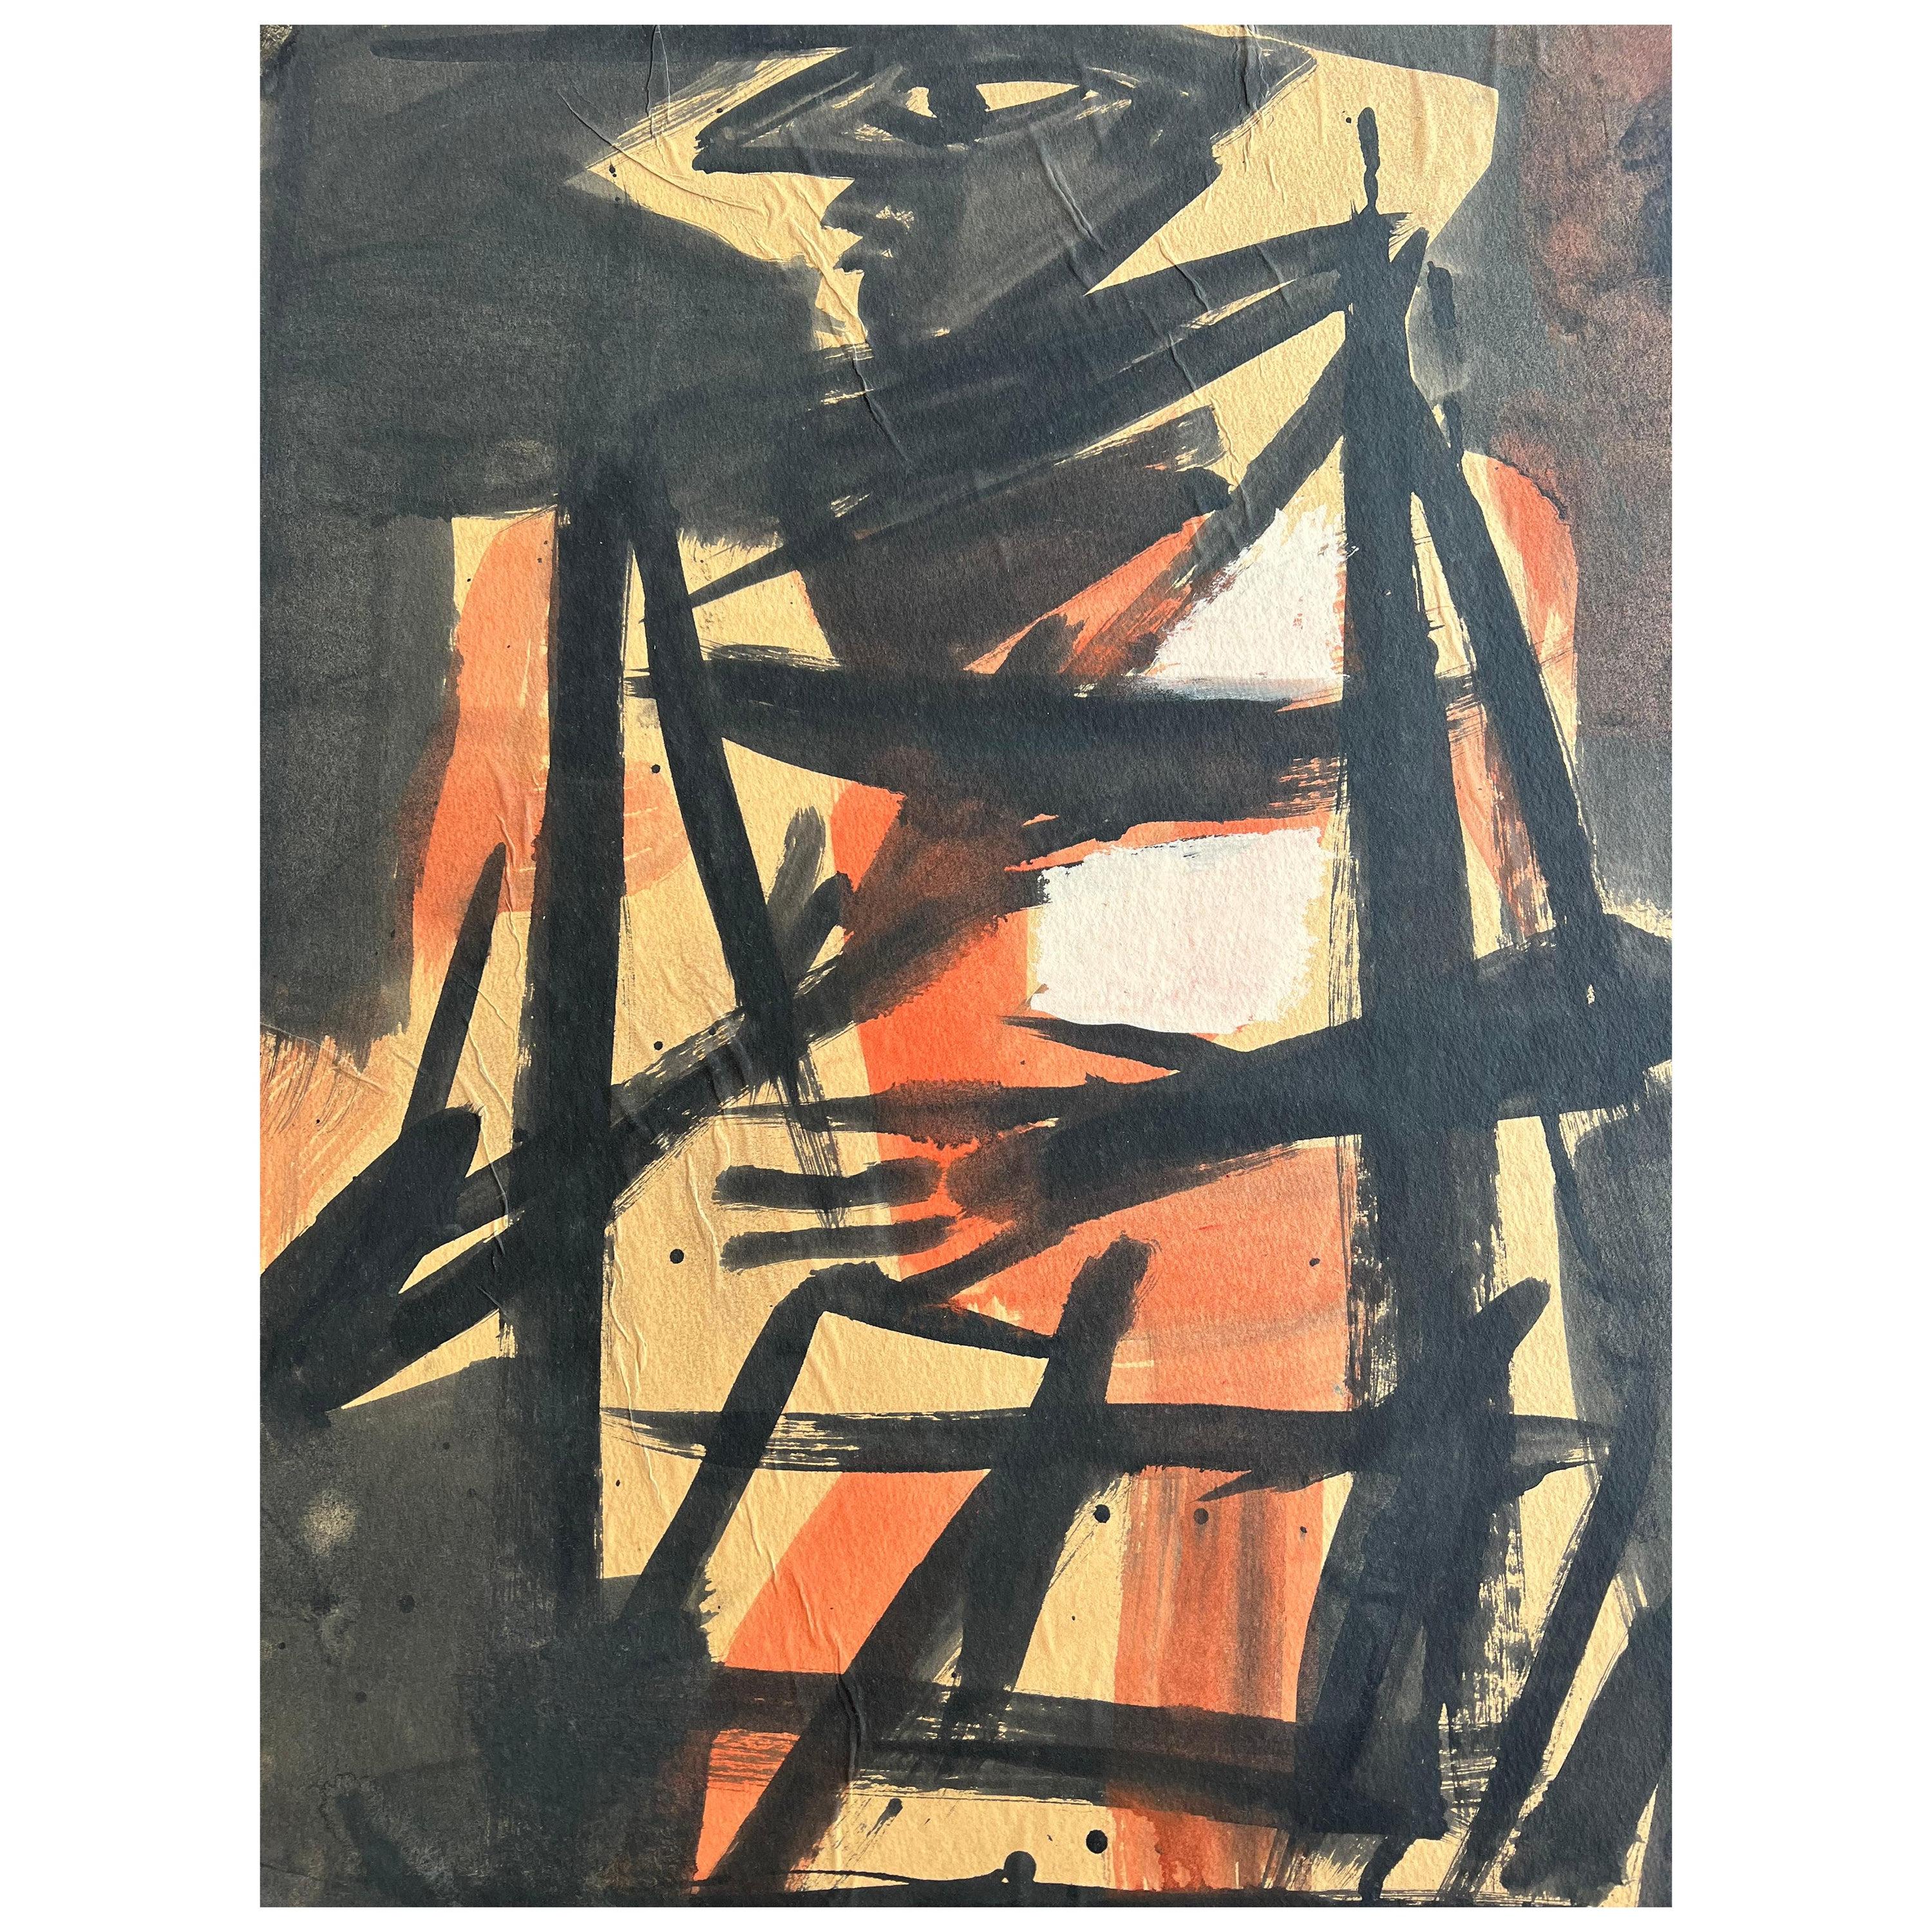 A fantastic gouache and ink drawing on paper, mounted on board by Vaclav Vytlacil, ca' 1945. Highly reflective of the style of the period, with influences of African art and NY Abstract Expressionist School, this gem of a drawing makes a strong